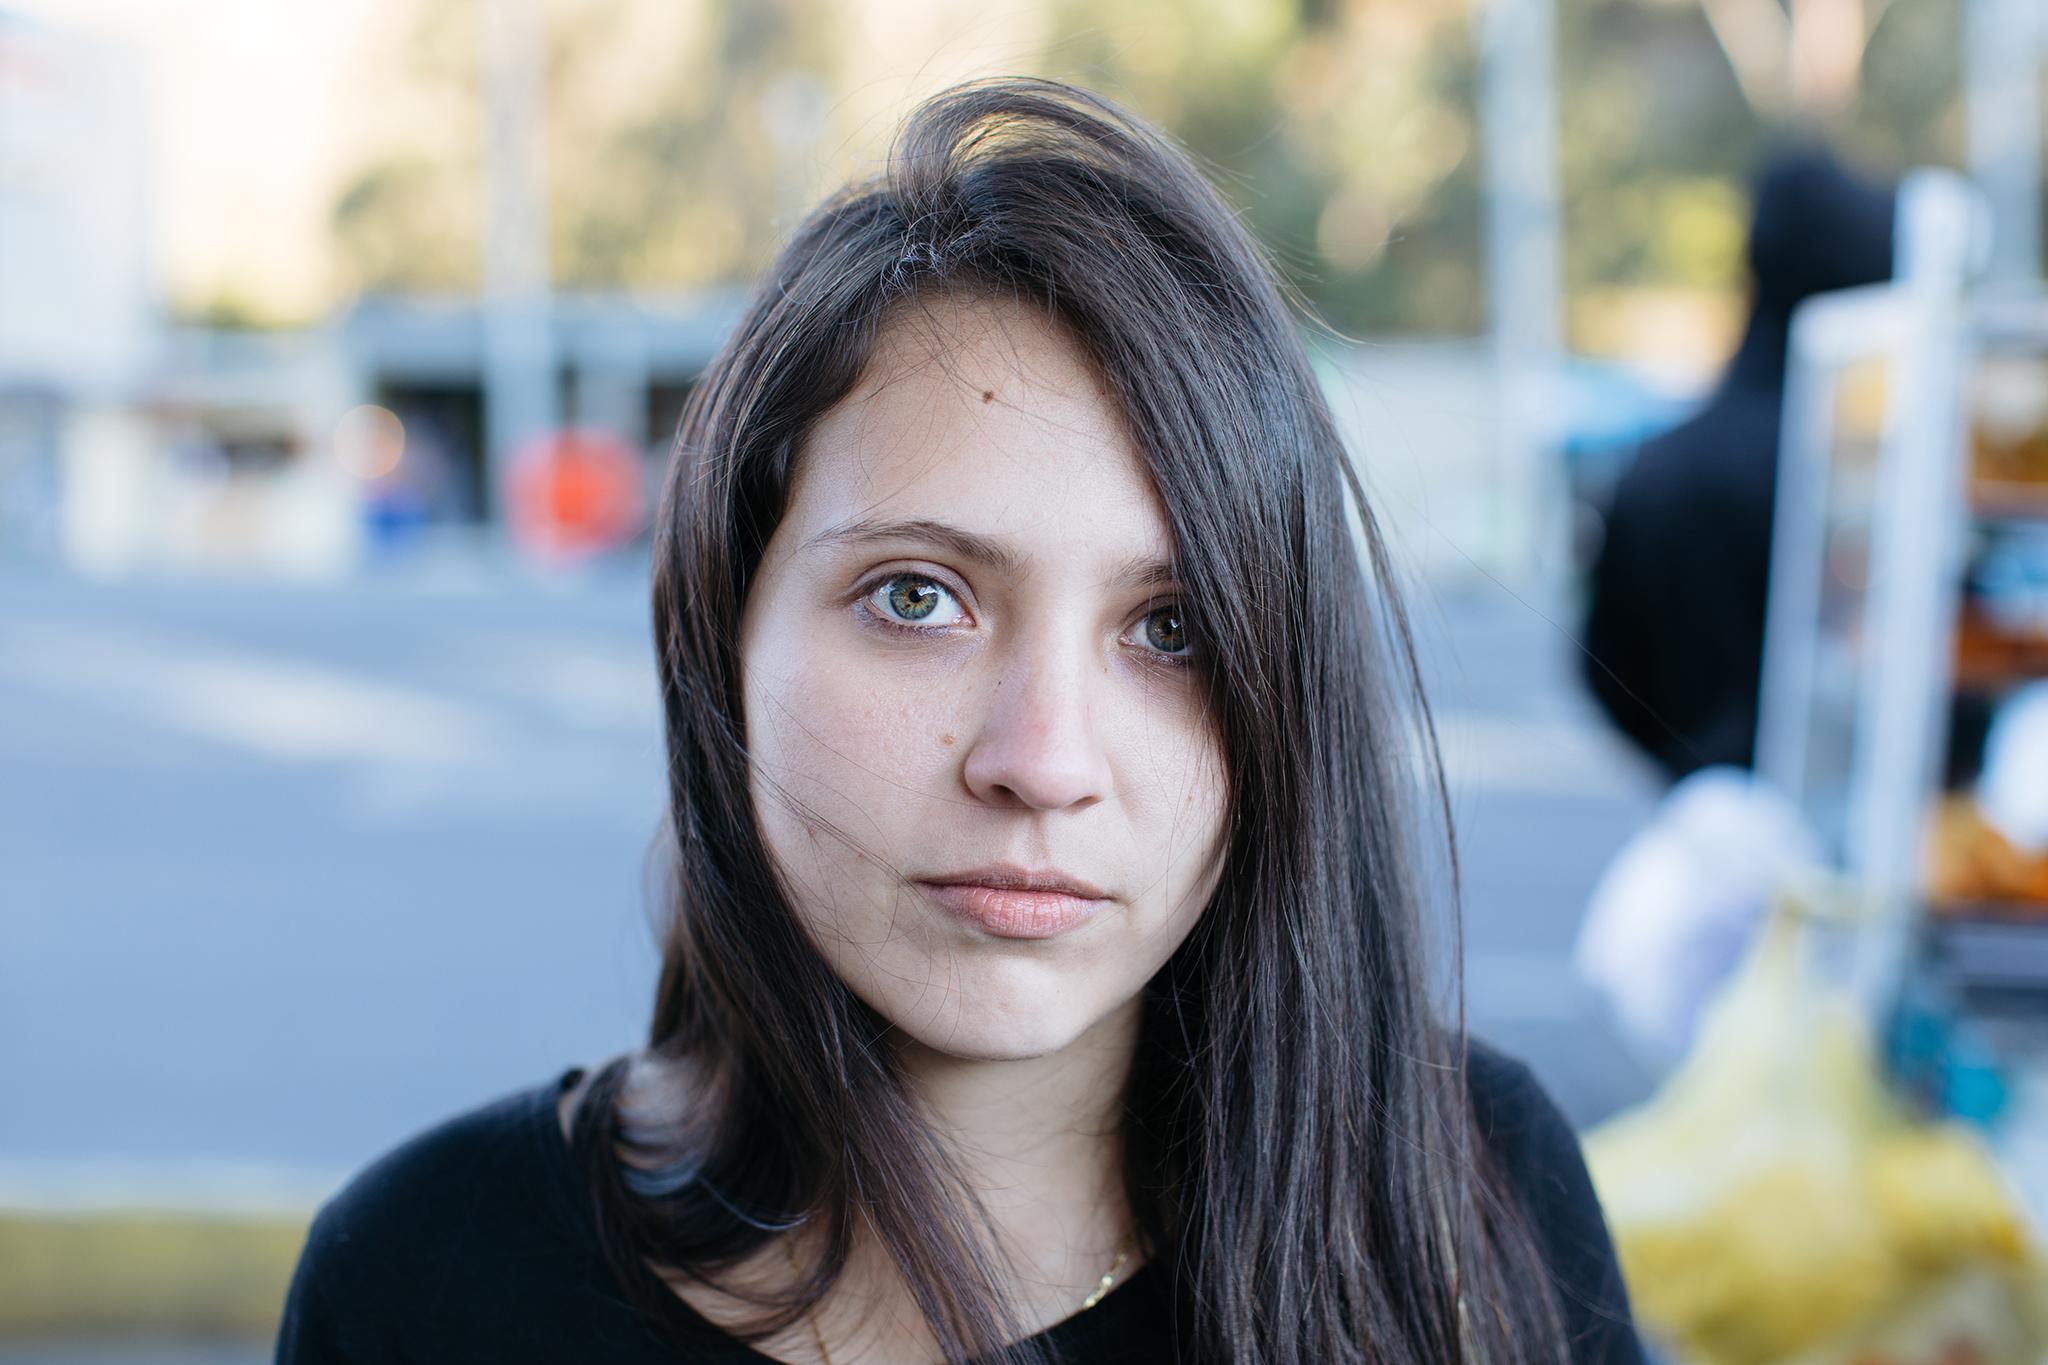 Like many other women fleeing the crisis, 23-year-old architecture graduate Bethzaz Roca has been subjected to xenophobia, sexual harassment and gender-based violence